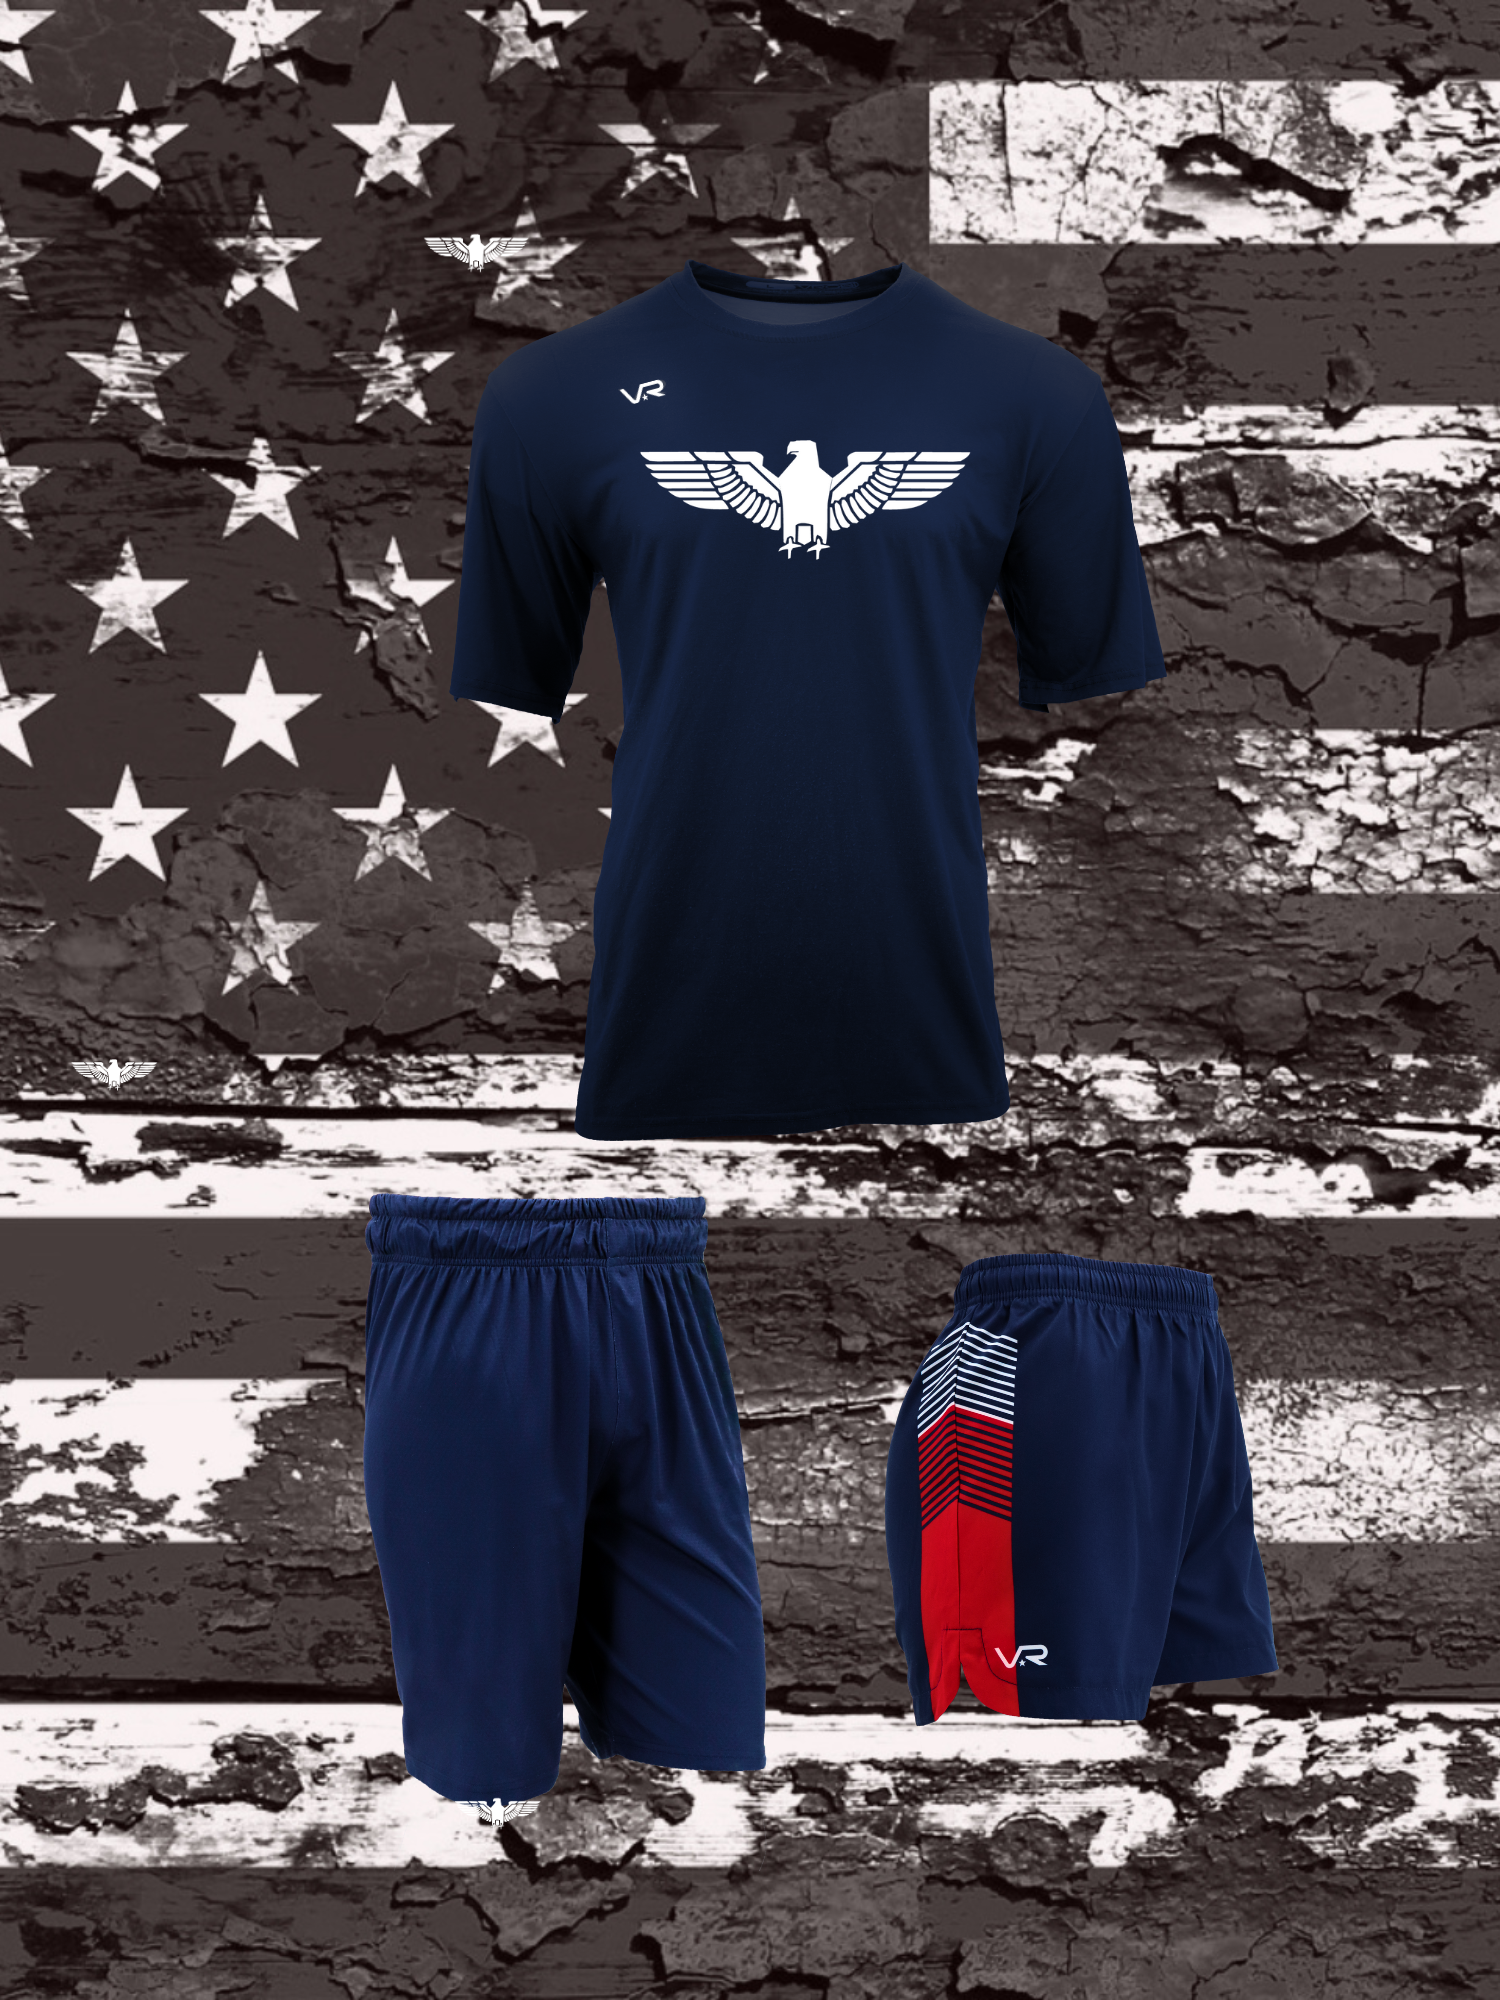 Commander Team Package featuring Custom T-Shirt and Athletic Shorts